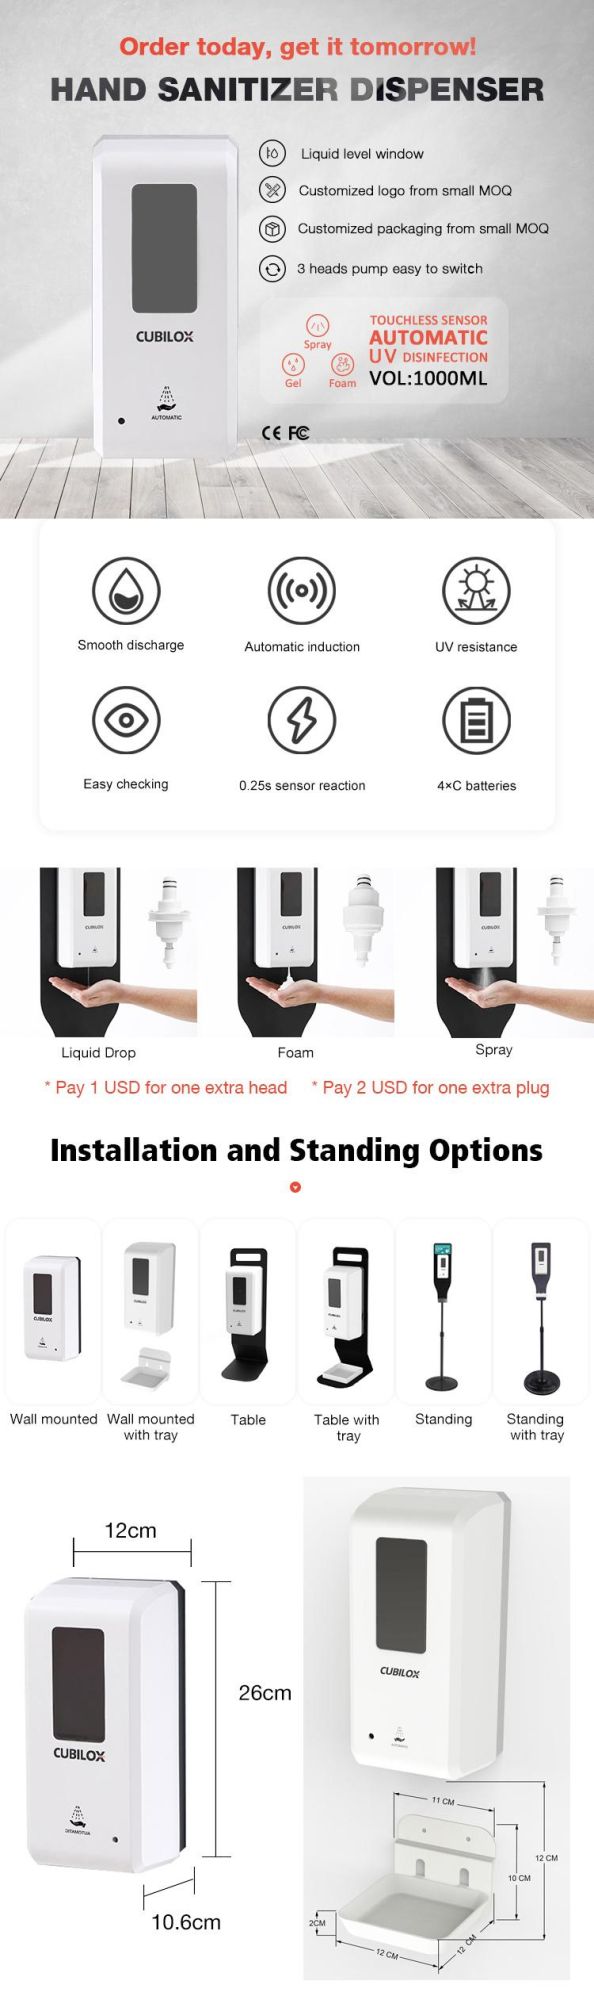 Full Automatic New Contact-Free Non-Touch Hands Sanitizer Dispenser